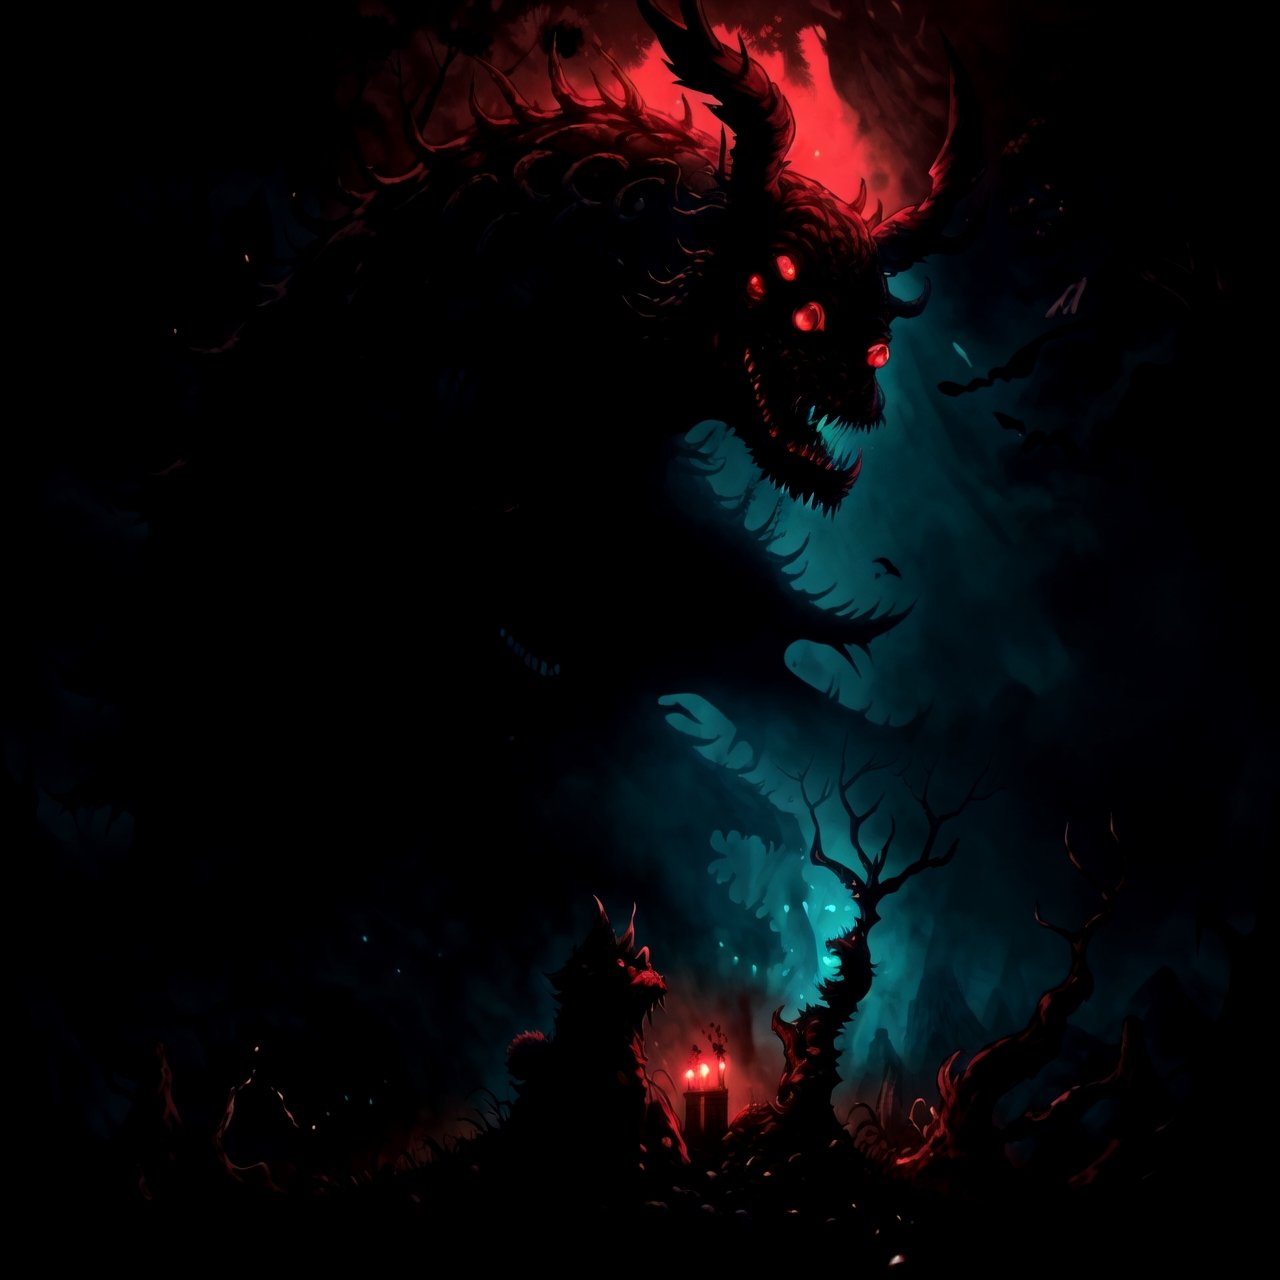 Rabbit monster voraciously devouring other animals in a gruesome, bloody spectacle, depicted through a digital illustration reminiscent of H.R. Giger's nightmarish biomechanical style. The scene unfolds in an otherworldly landscape with twisted trees and surreal terrain, showcasing the horror of the feast with a chilling color temperature, conveying the monster's sinister delight through menacing facial expressions, illuminated by eerie, dim lighting, and an atmosphere steeped in malevolence. 

300 DPI, HD, 8K, Best Perspective, Best Lighting, Best Composition, Good Posture, High Resolution, High Quality, 4K Render, Highly Denoised, Clear distinction between object and body parts, Masterpiece, Beautiful face, 
Beautiful body, smooth skin, glistening skin, highly detailed background, highly detailed clothes, 
highly detailed face, beautiful eyes, beautiful lips, cute, beautiful scenery, gorgeous, beautiful clothes, best lighting, cinematic , great colors, great lighting, masterpiece, Good body posture, proper posture, correct hands, 
correct fingers, right number of fingers, clear image, face expression should be good, clear face expression, correct face , correct face expression,

,ghost nocturnal,fantasy00d,bbunnysuit